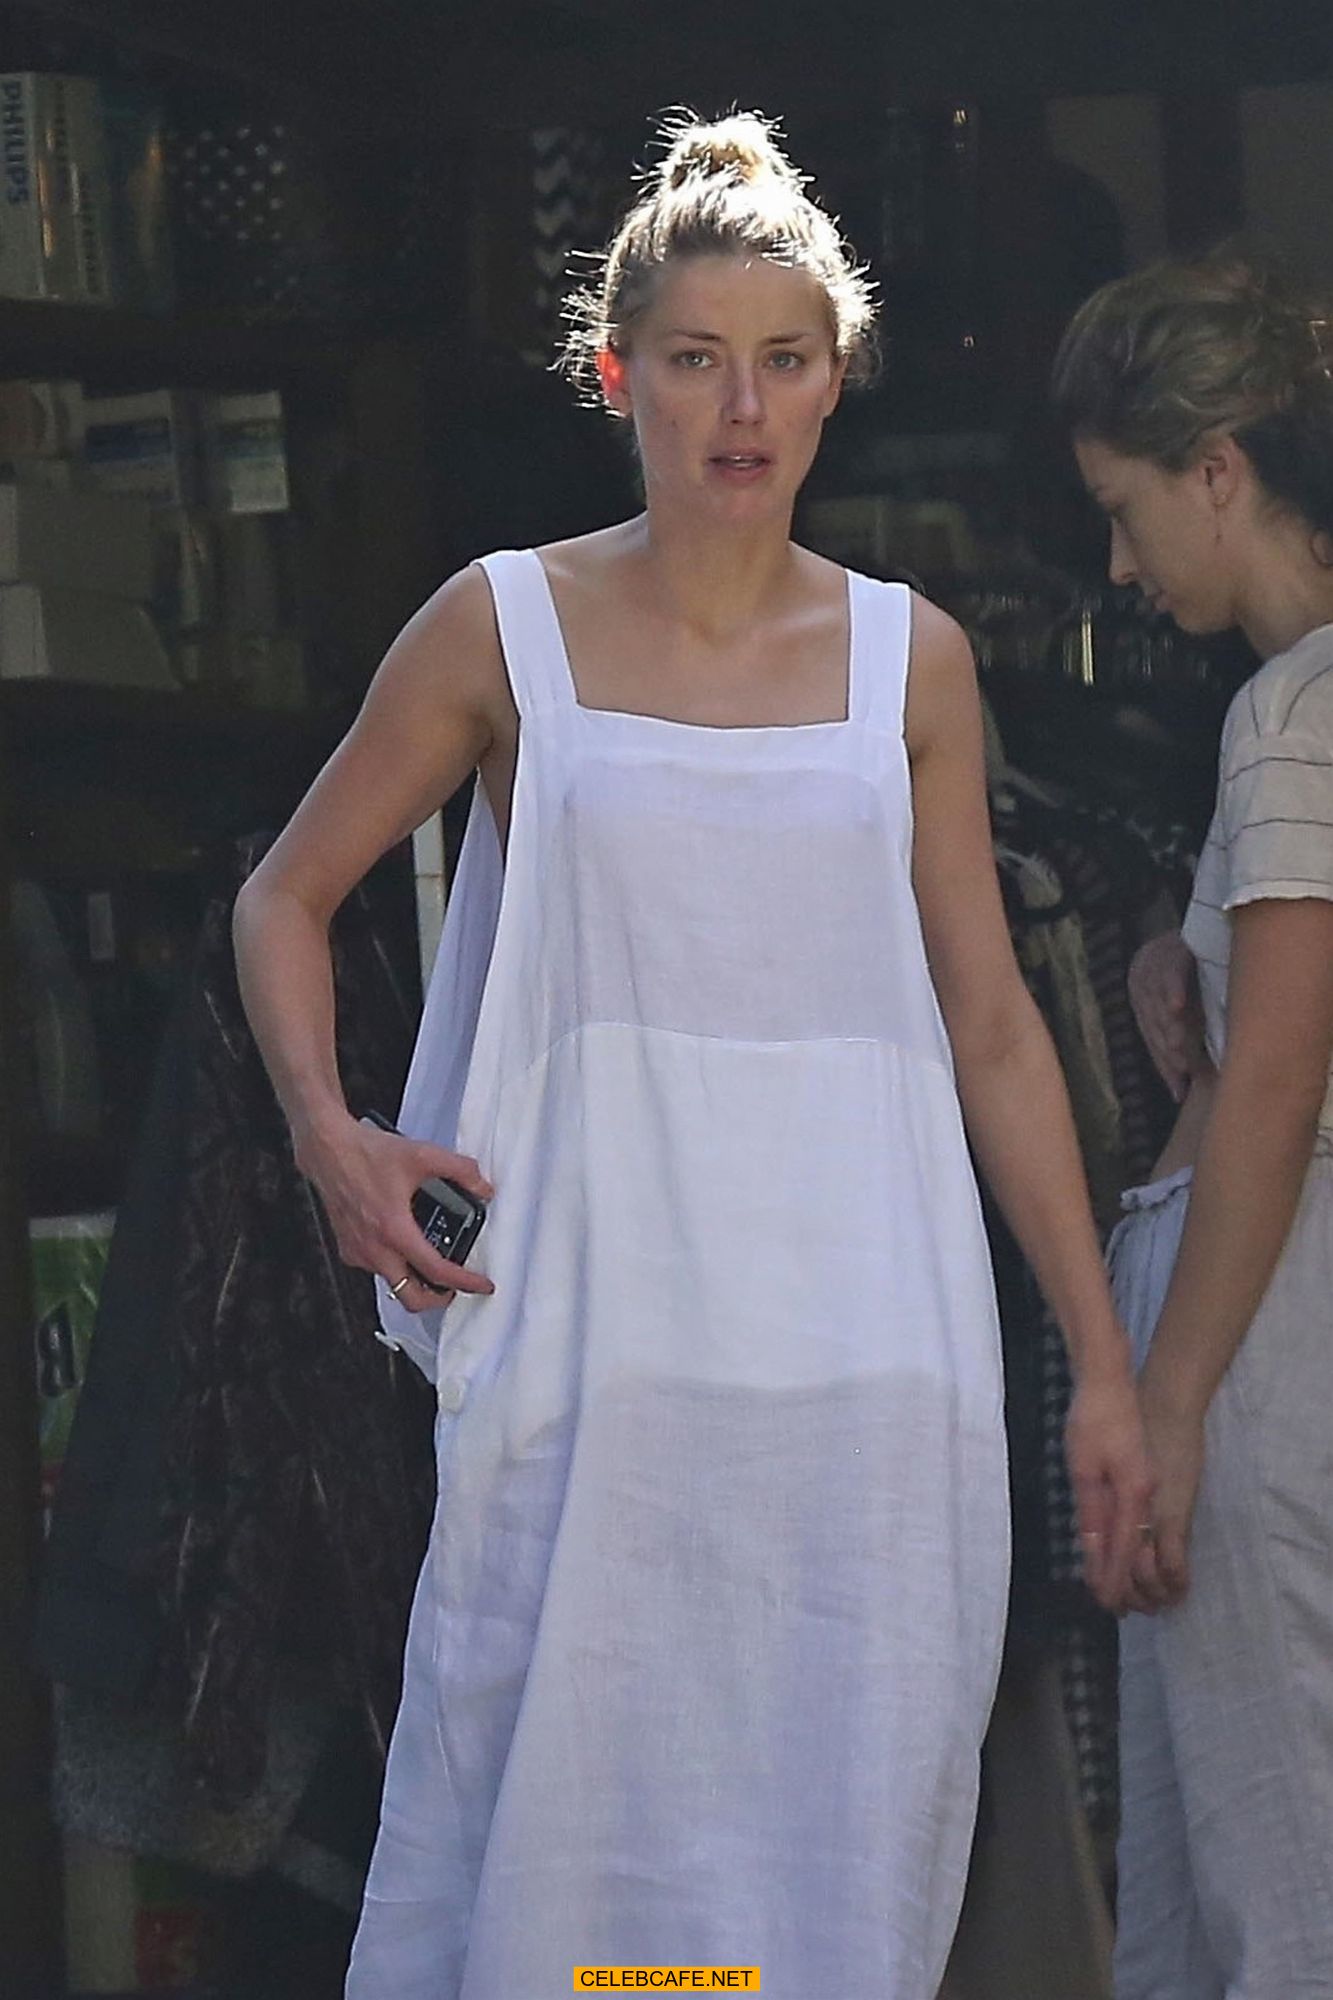 amber_heard_has_a_nip-slip_while_cleaning_out_her_garage_in_la_07302018_8.jpg